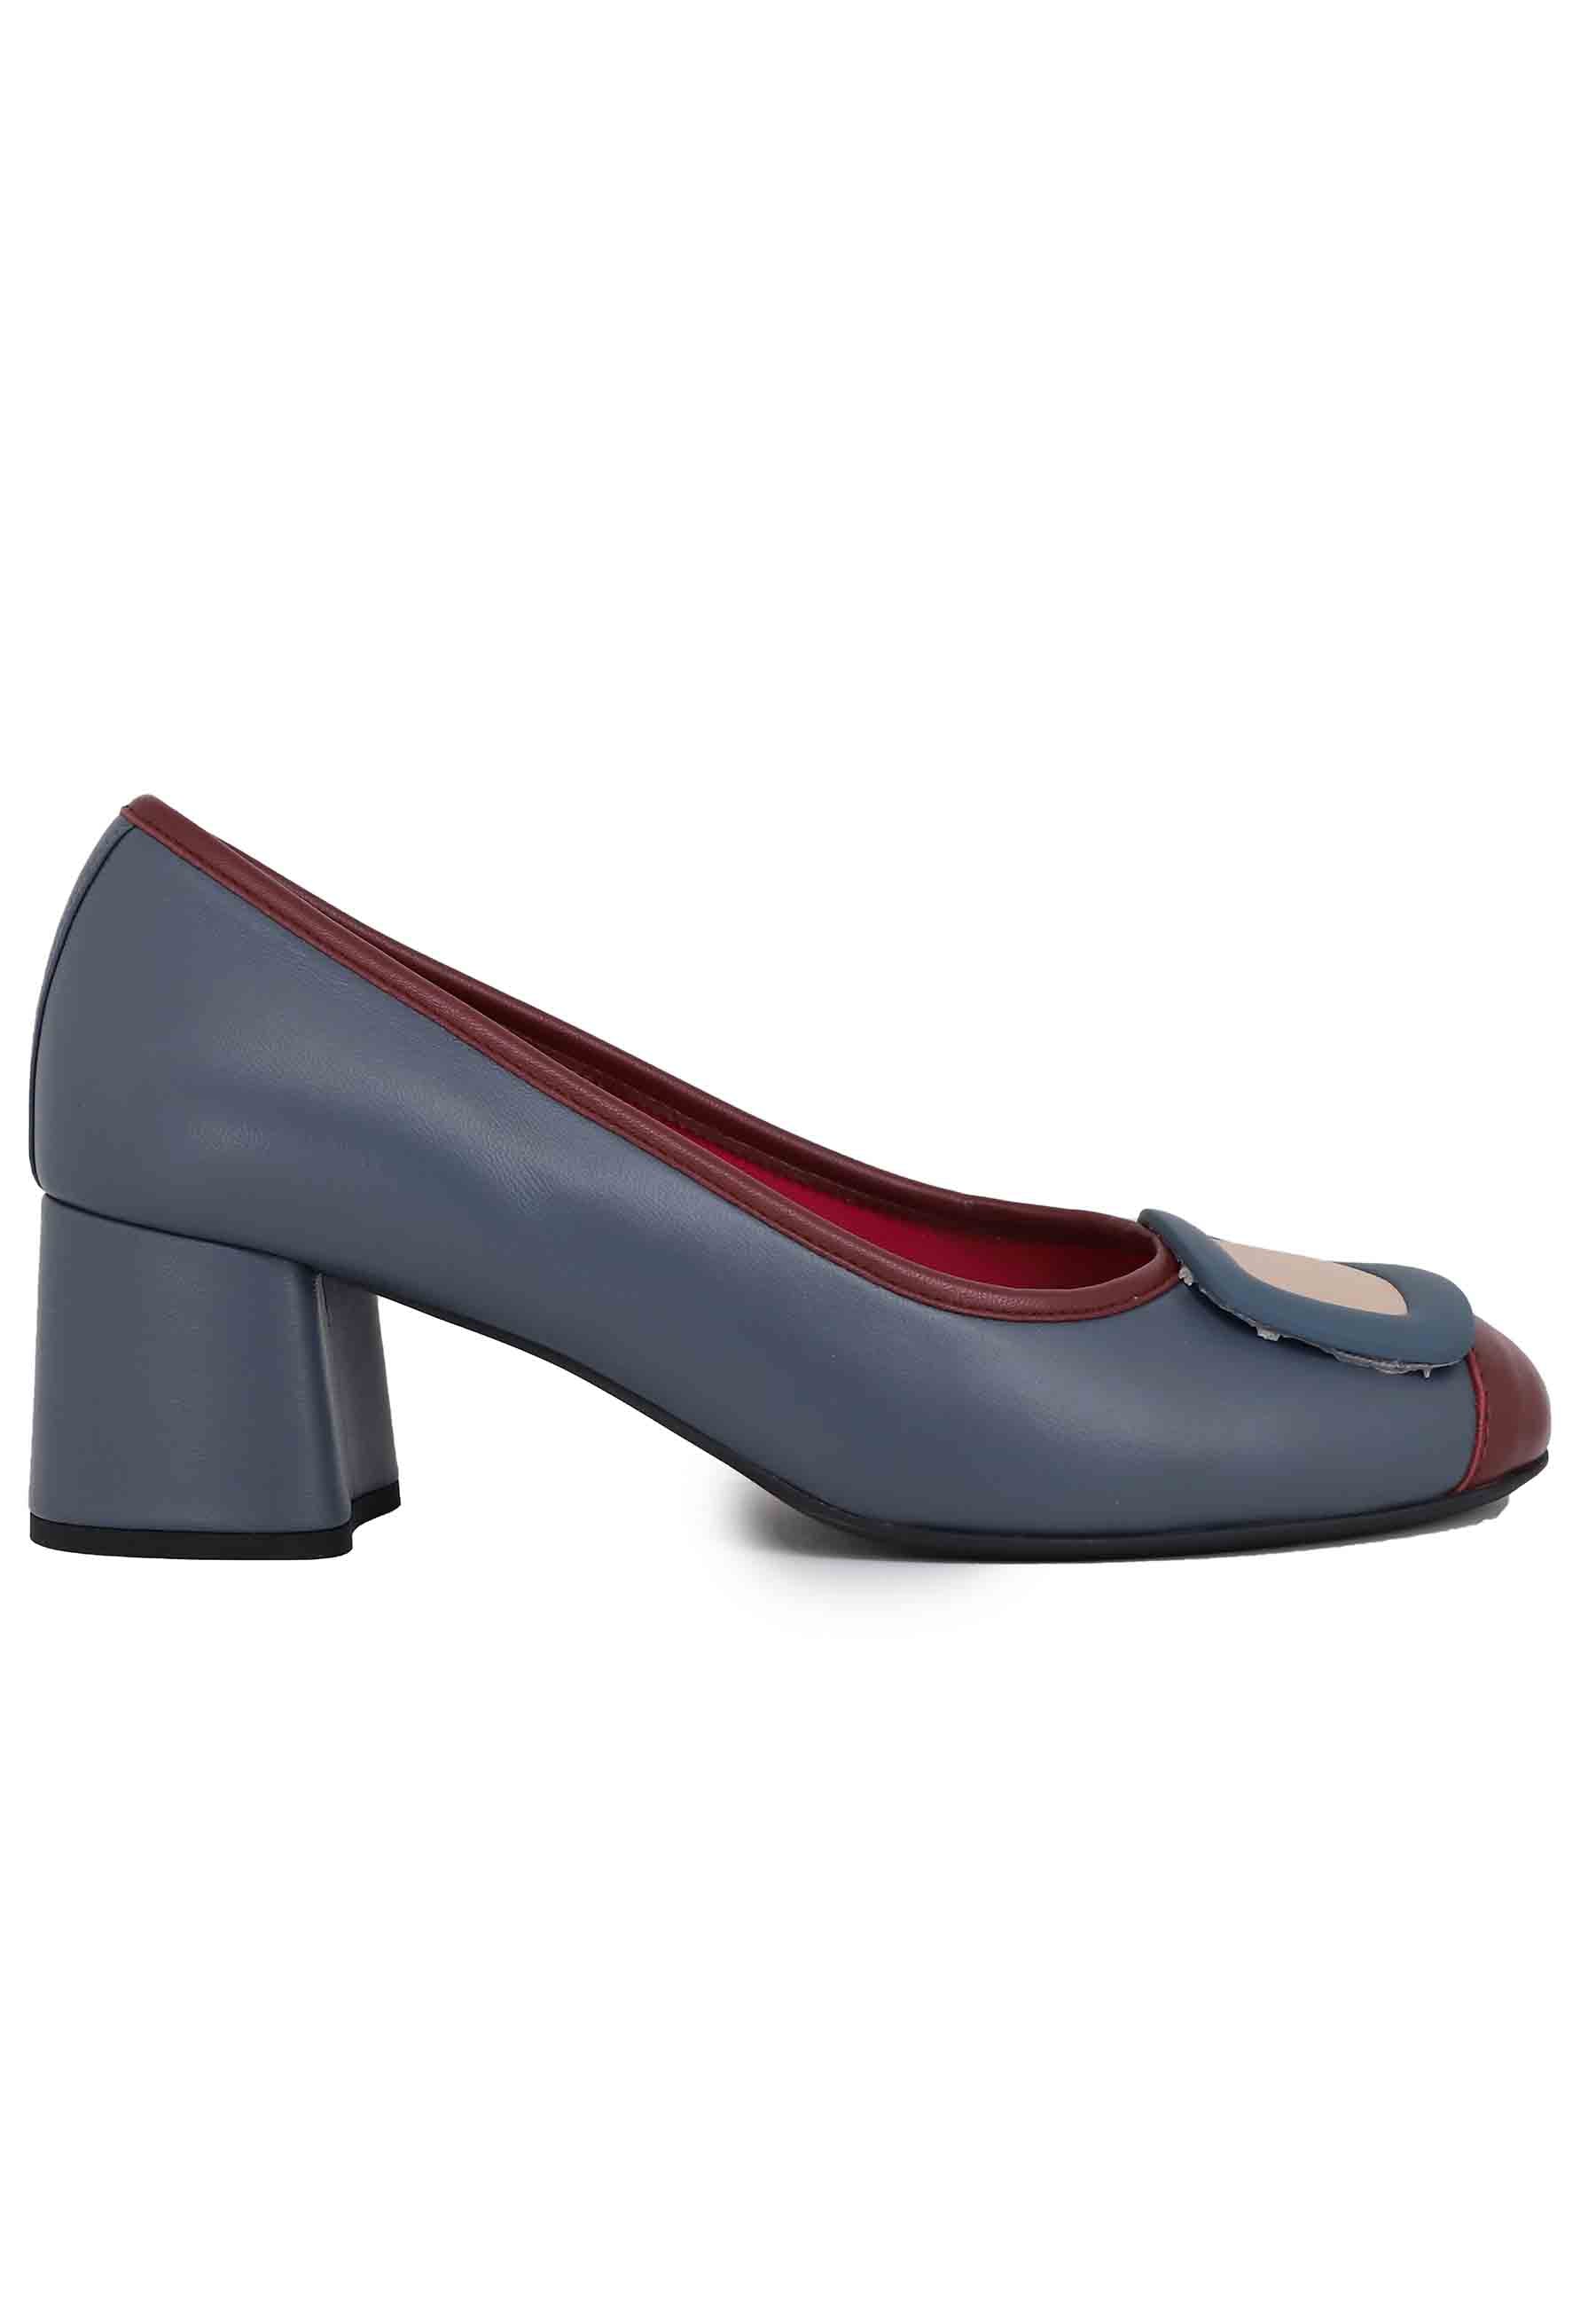 Women's blue leather pumps with accessory and round toe